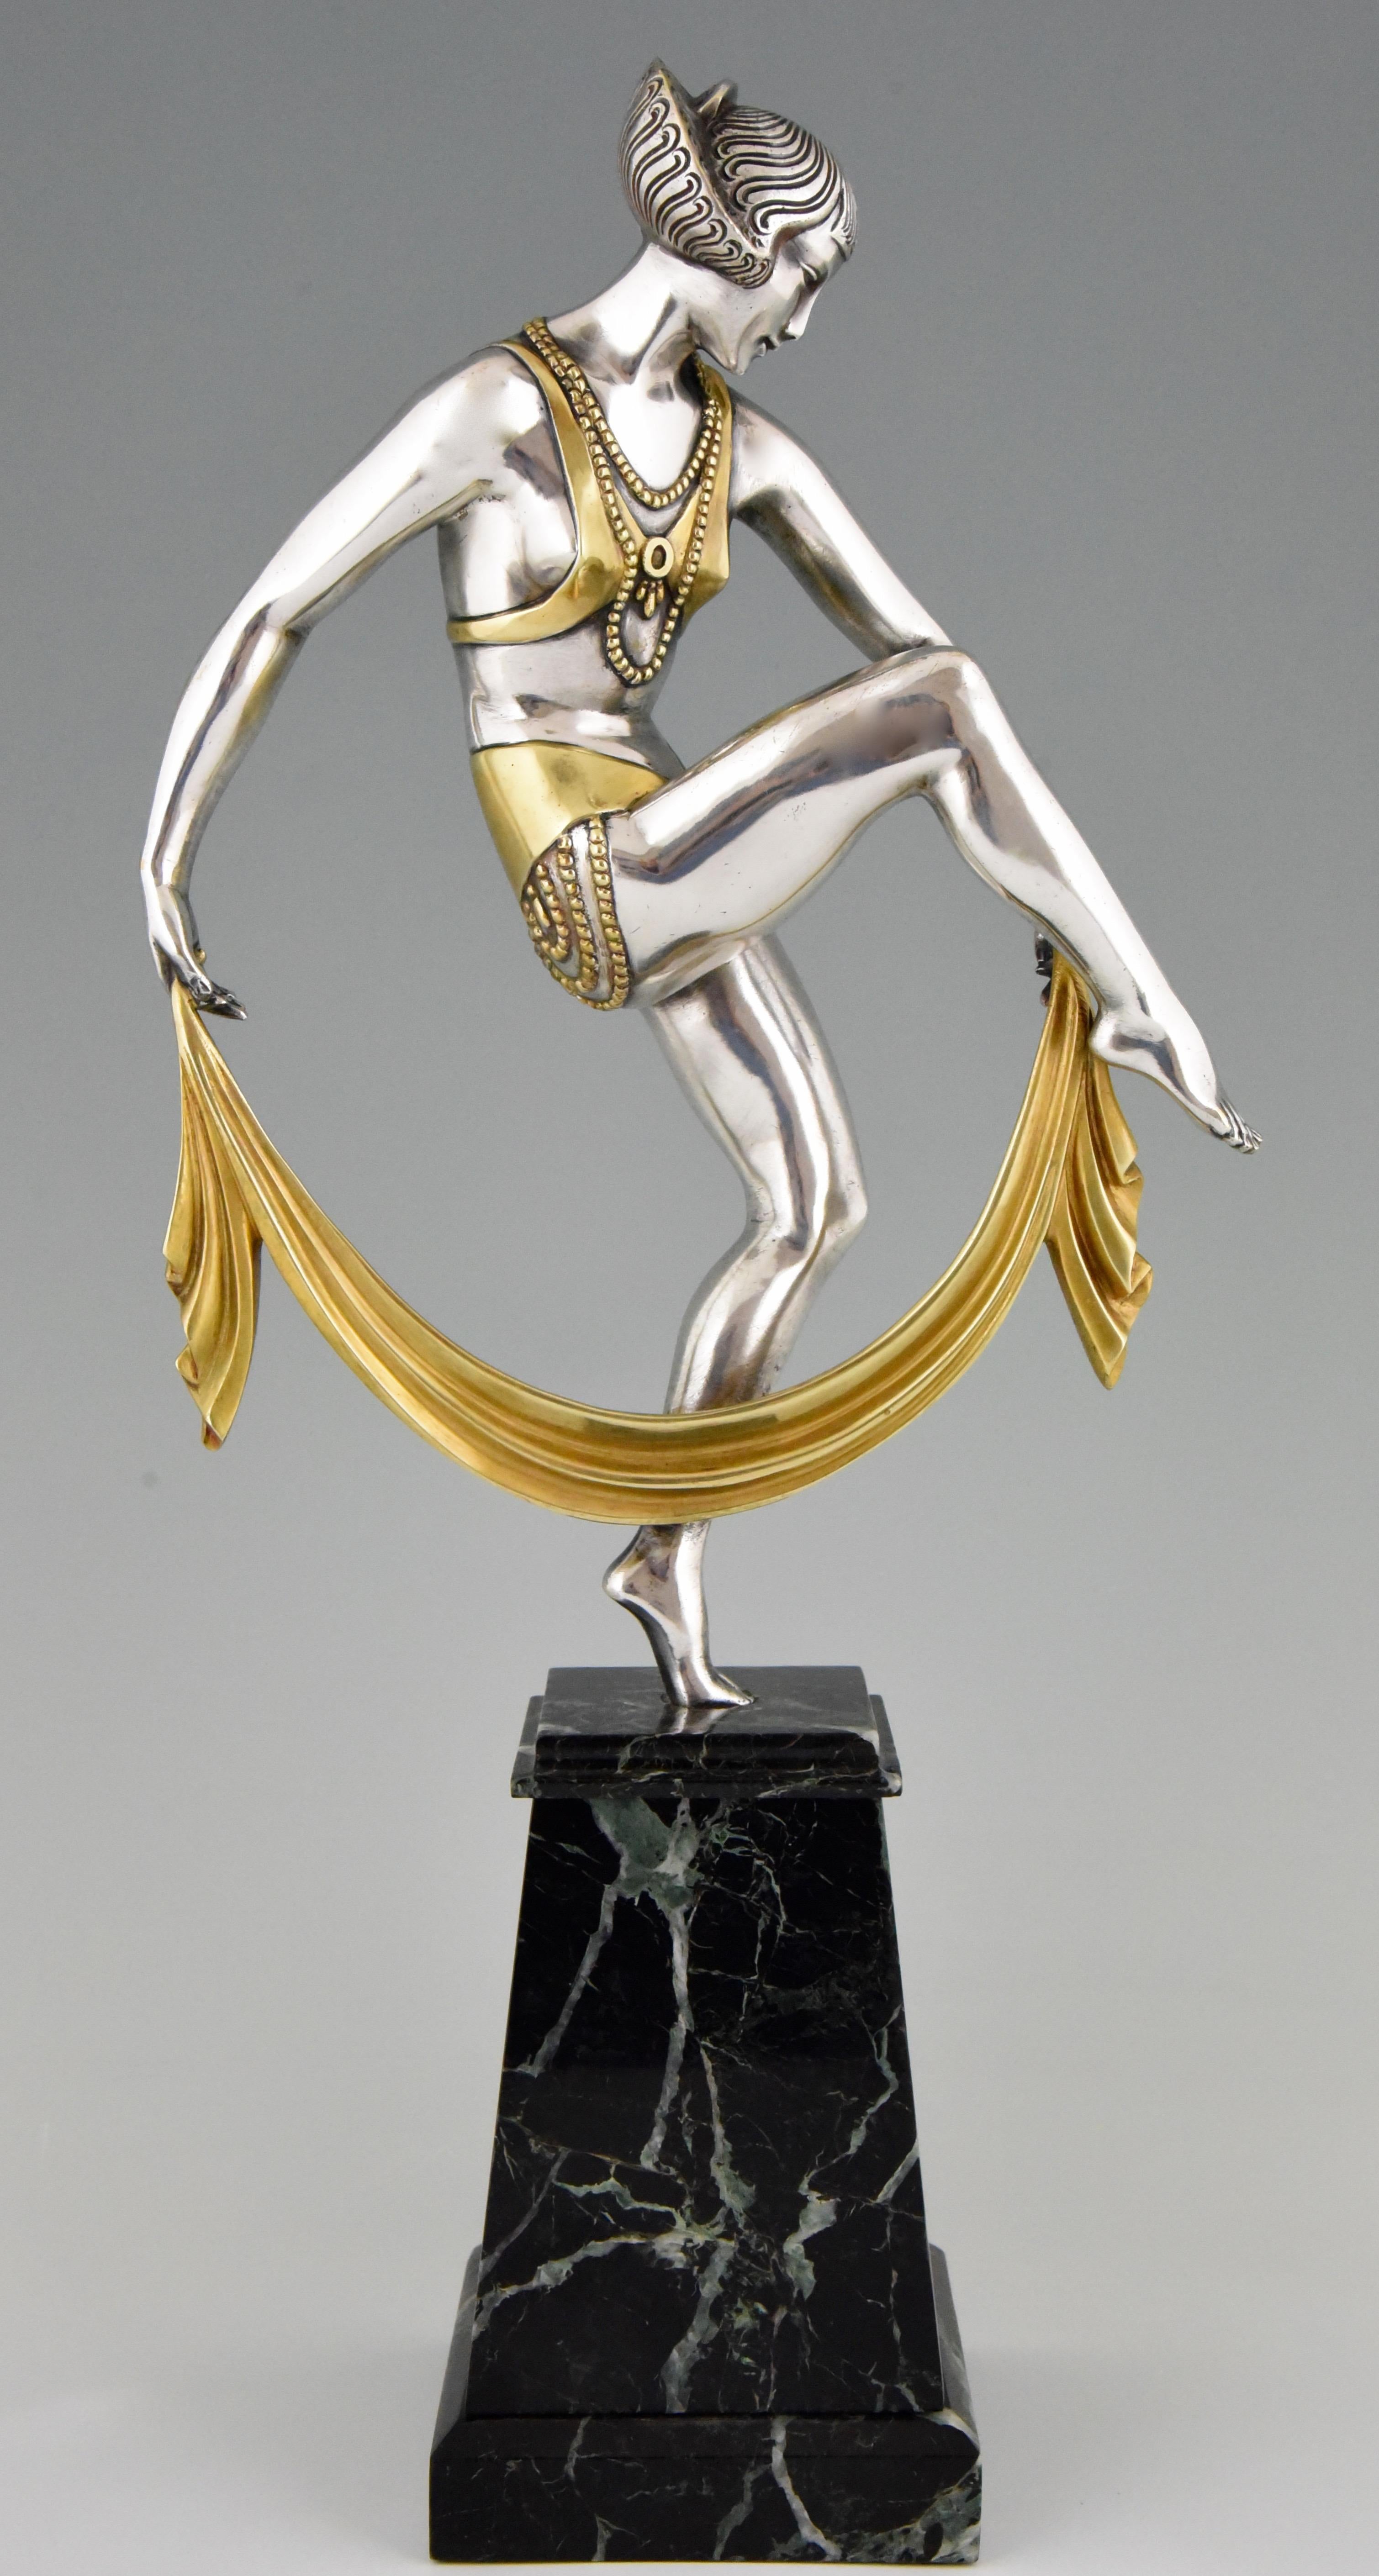 Elegant Art Deco bronze sculpture of a scarf dancer by Raymonde Guerbe.
The beautifully detailed silvered and gilt bronze figure stands on a fine green marble base. France 1925. This bronze is illustrated on page 282 of the book “Statuettes of the